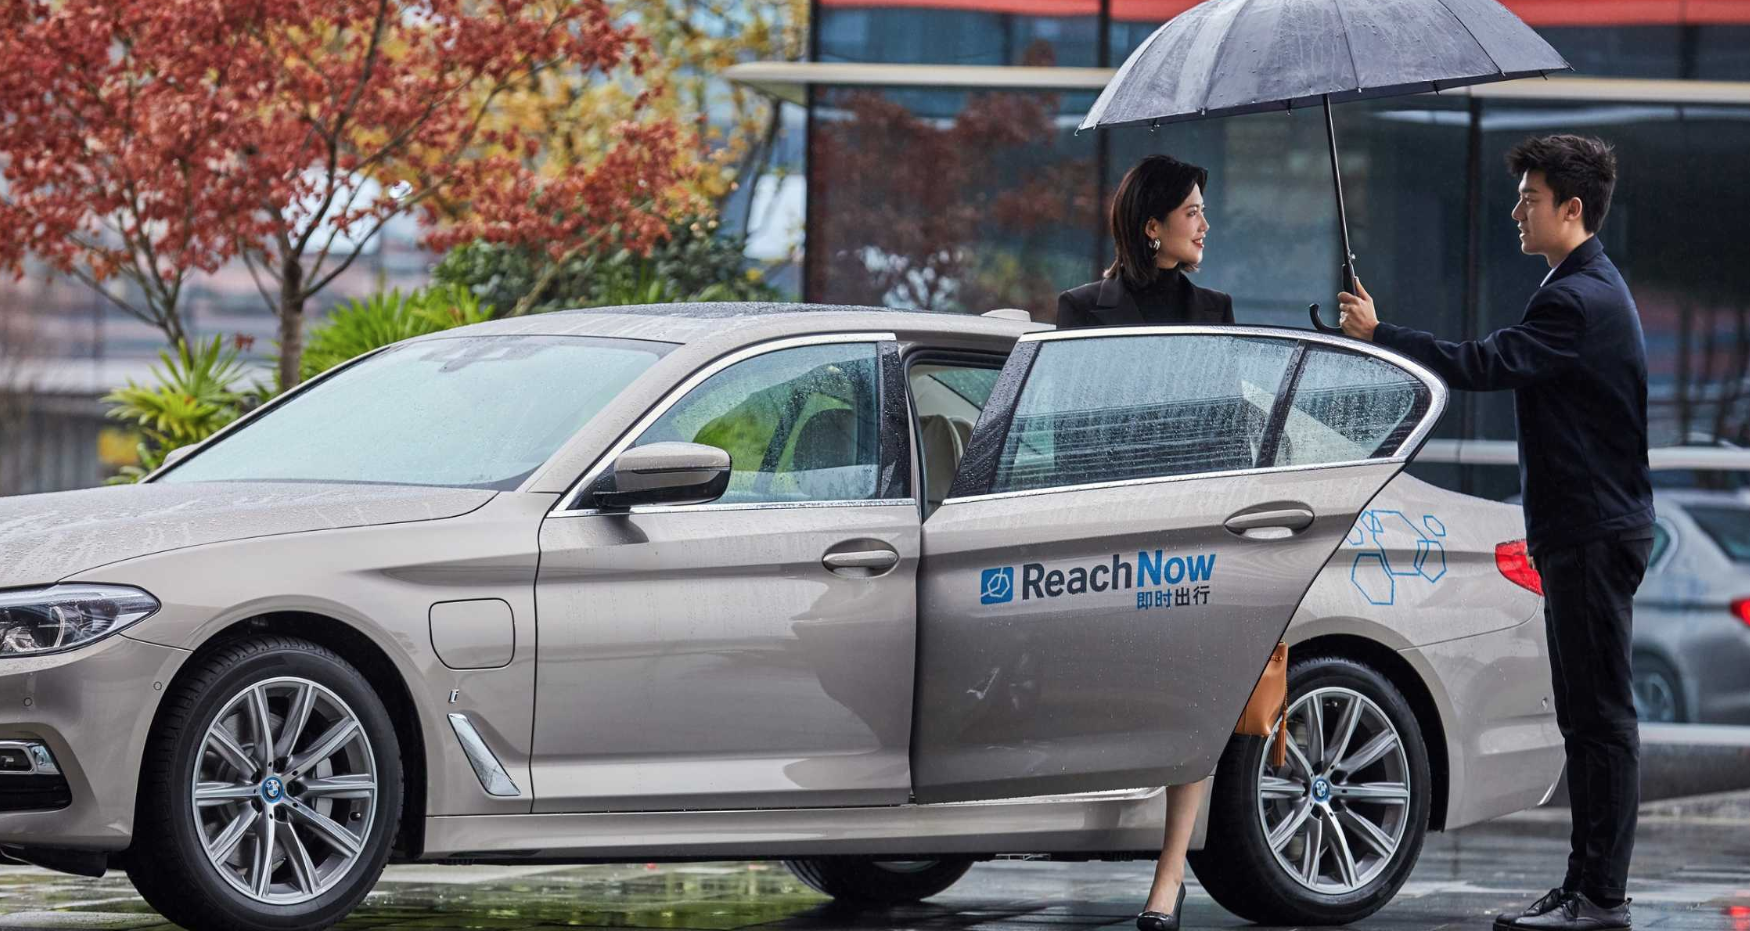 BMW’s Premium Online Ride-hailing Service Launched in China